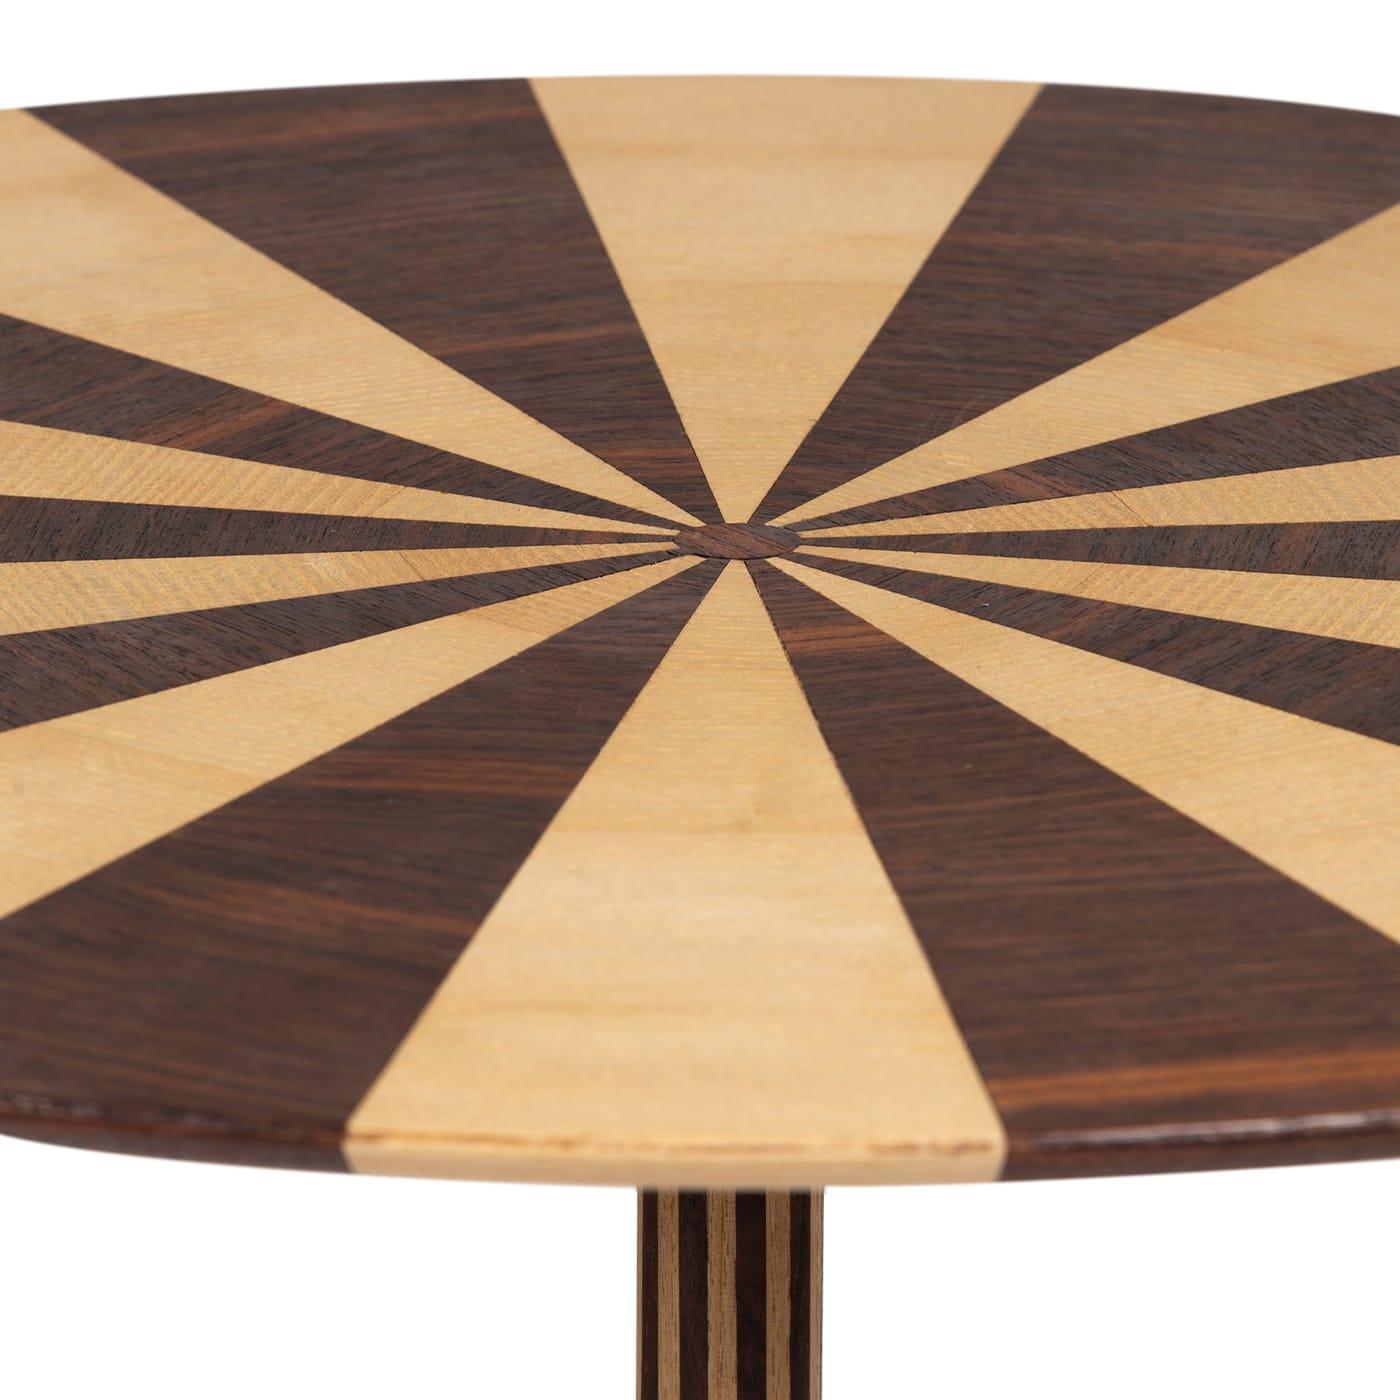 The captivating allure distinguishing this round tea table draws inspiration from the fragile balance of life. Part of the Circensi Collection, the design is marked by a wedge-like motif achieved by alternating stripes of ash and Rio rosewood. The